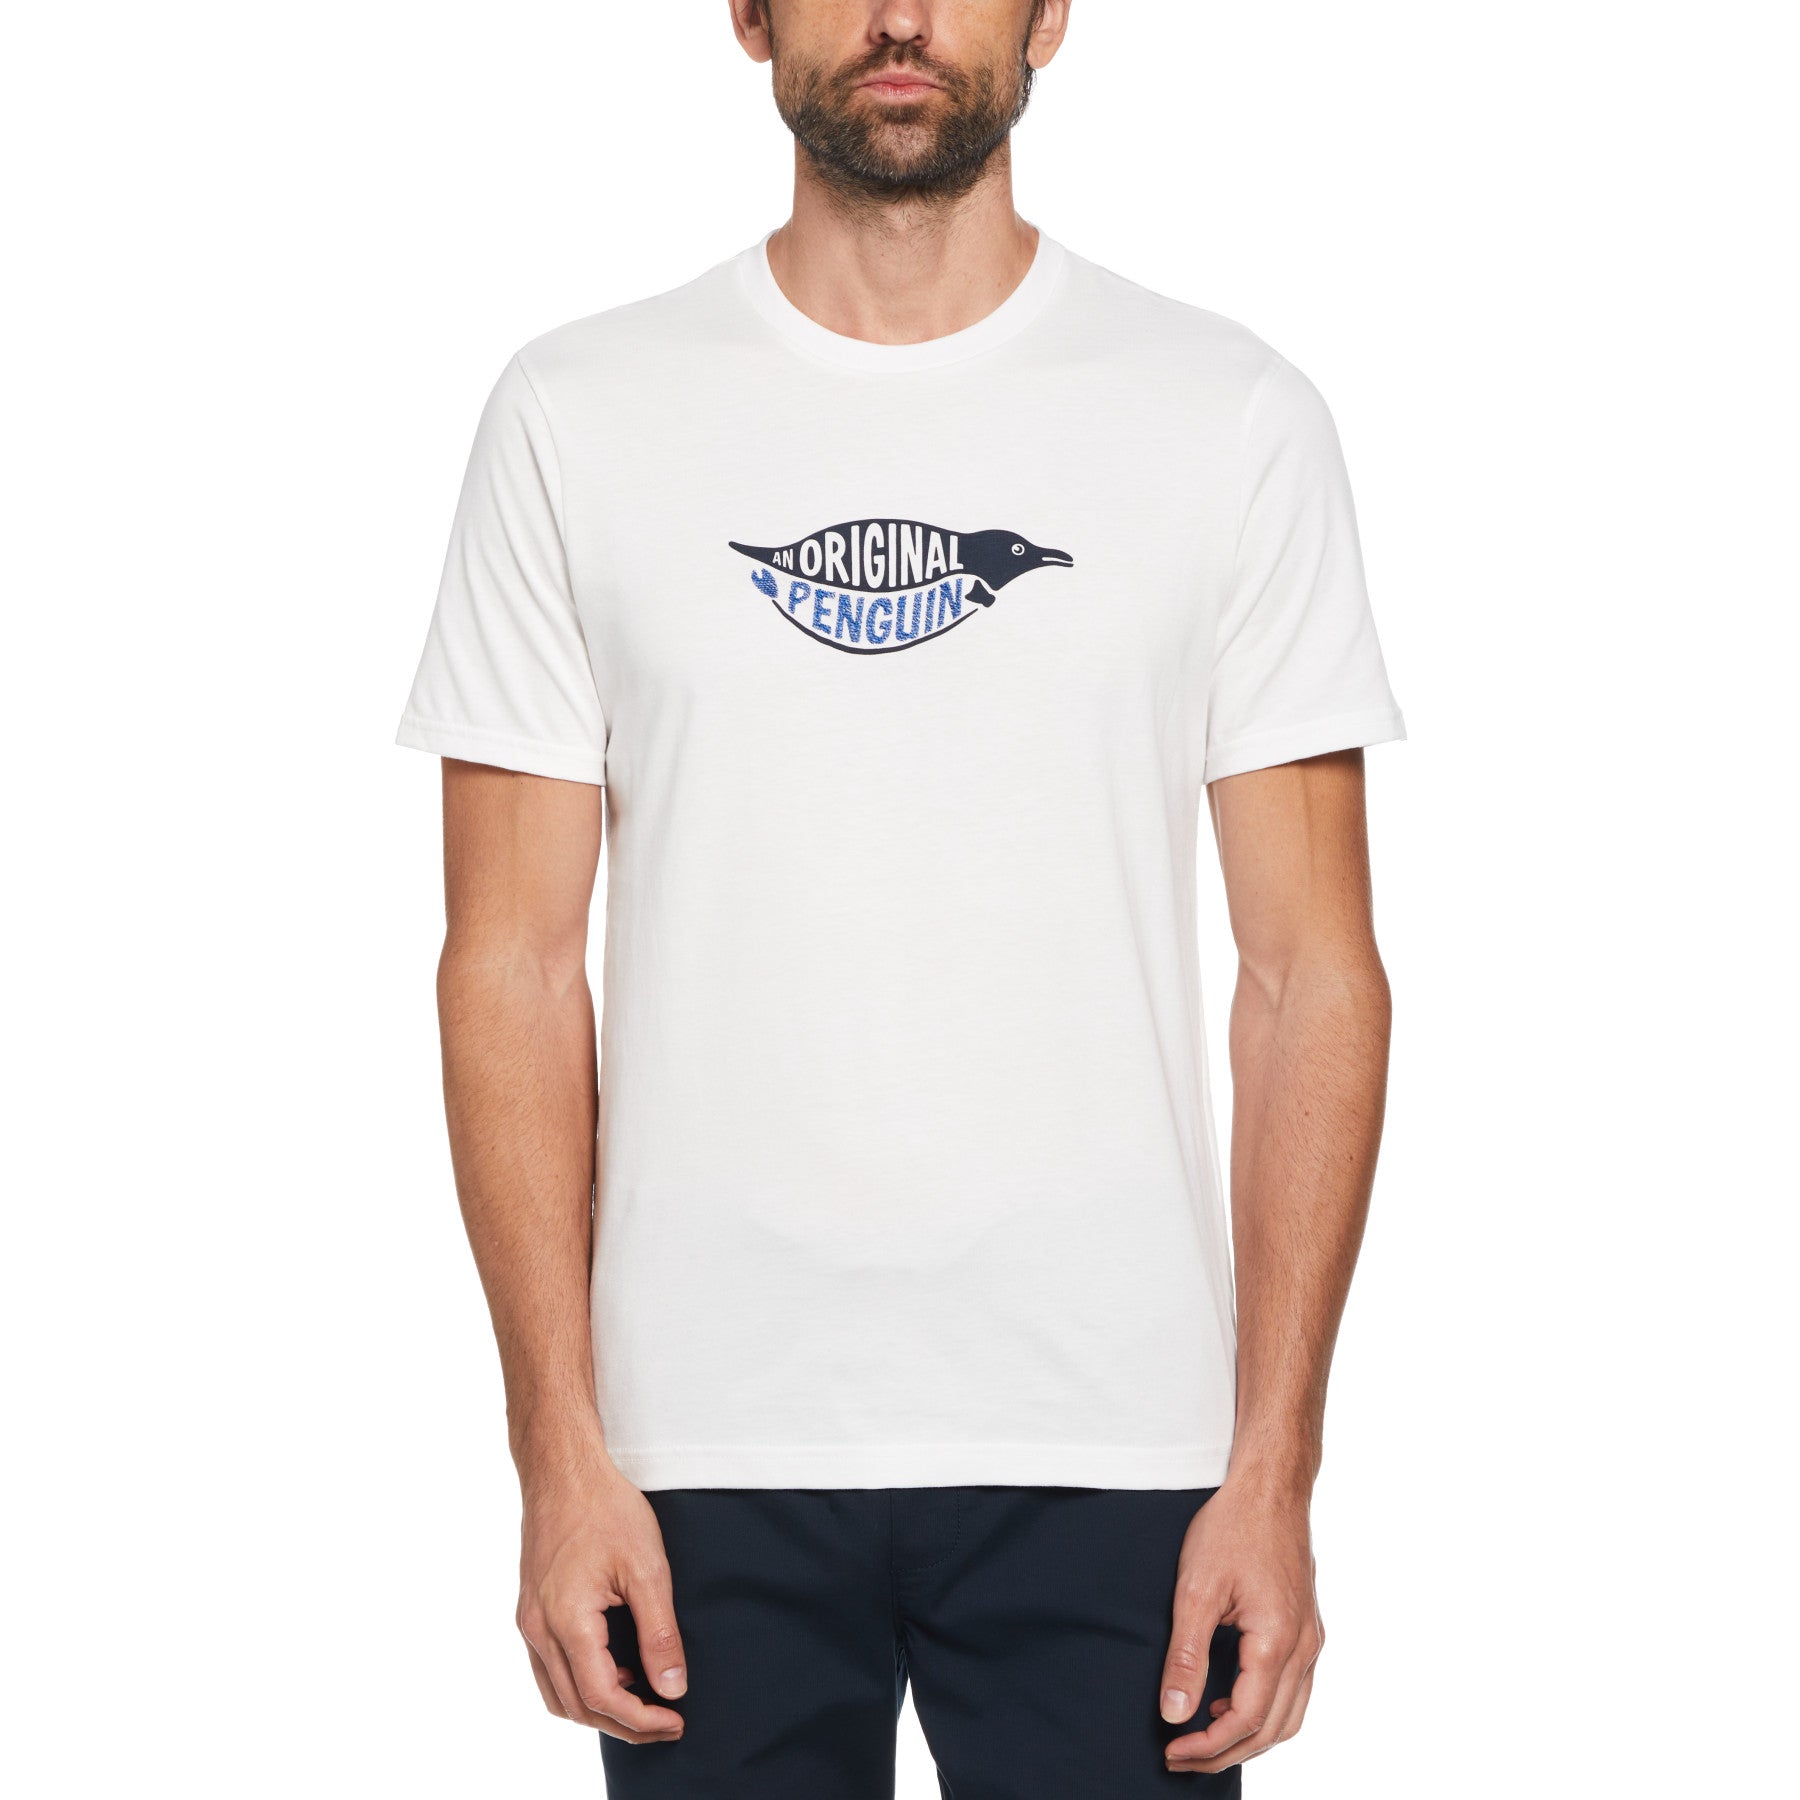 View Embroidered Penguin Graphic TShirt In Bright White information